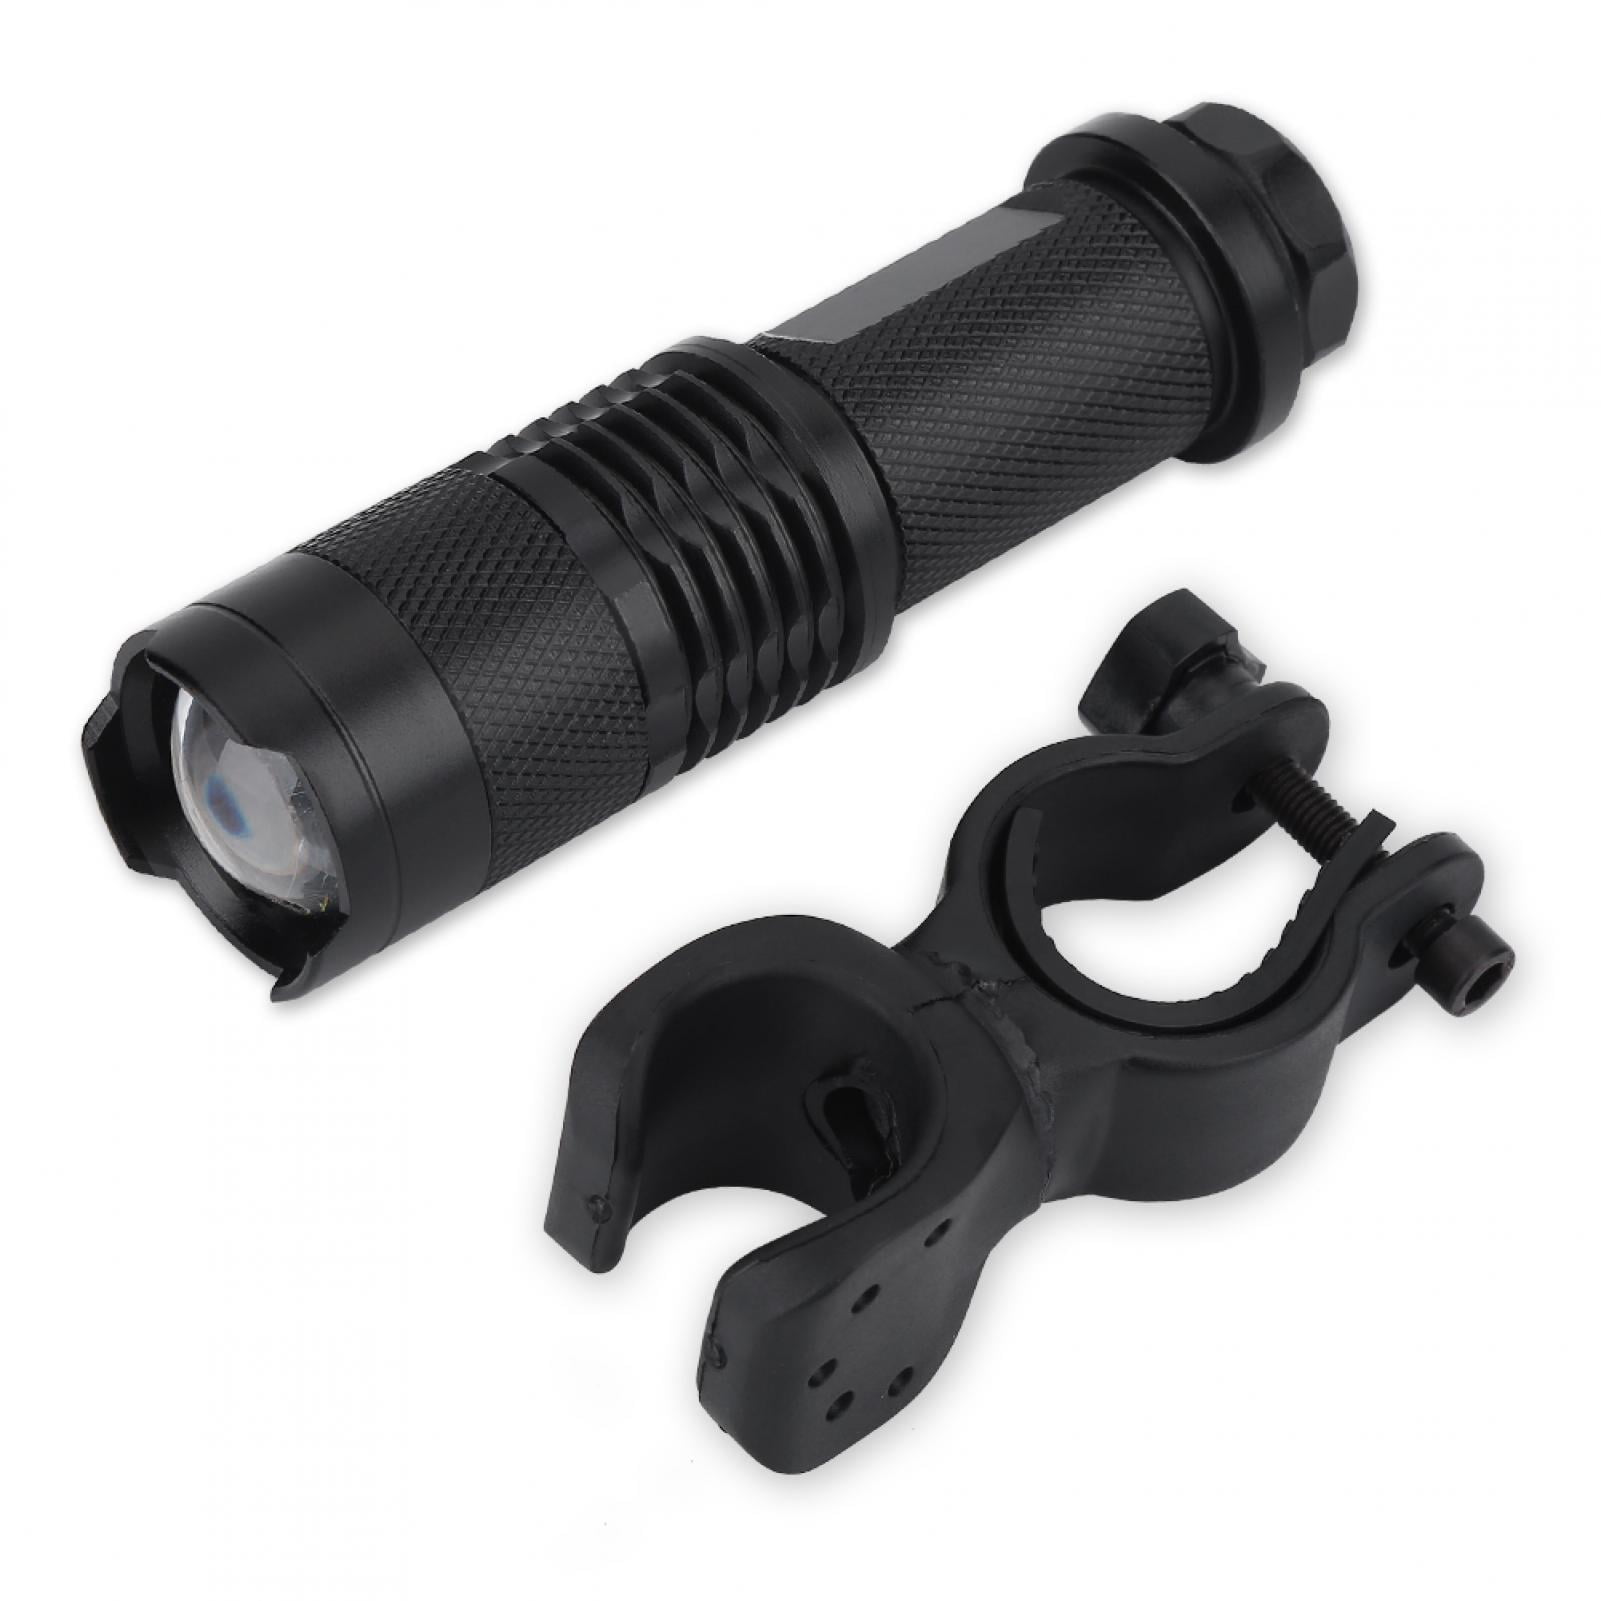 BLACK COLOR Details about   THE TORCH BY INCREDIBRIGHT SUPER BRIGHT LED BIKE LIGHT 